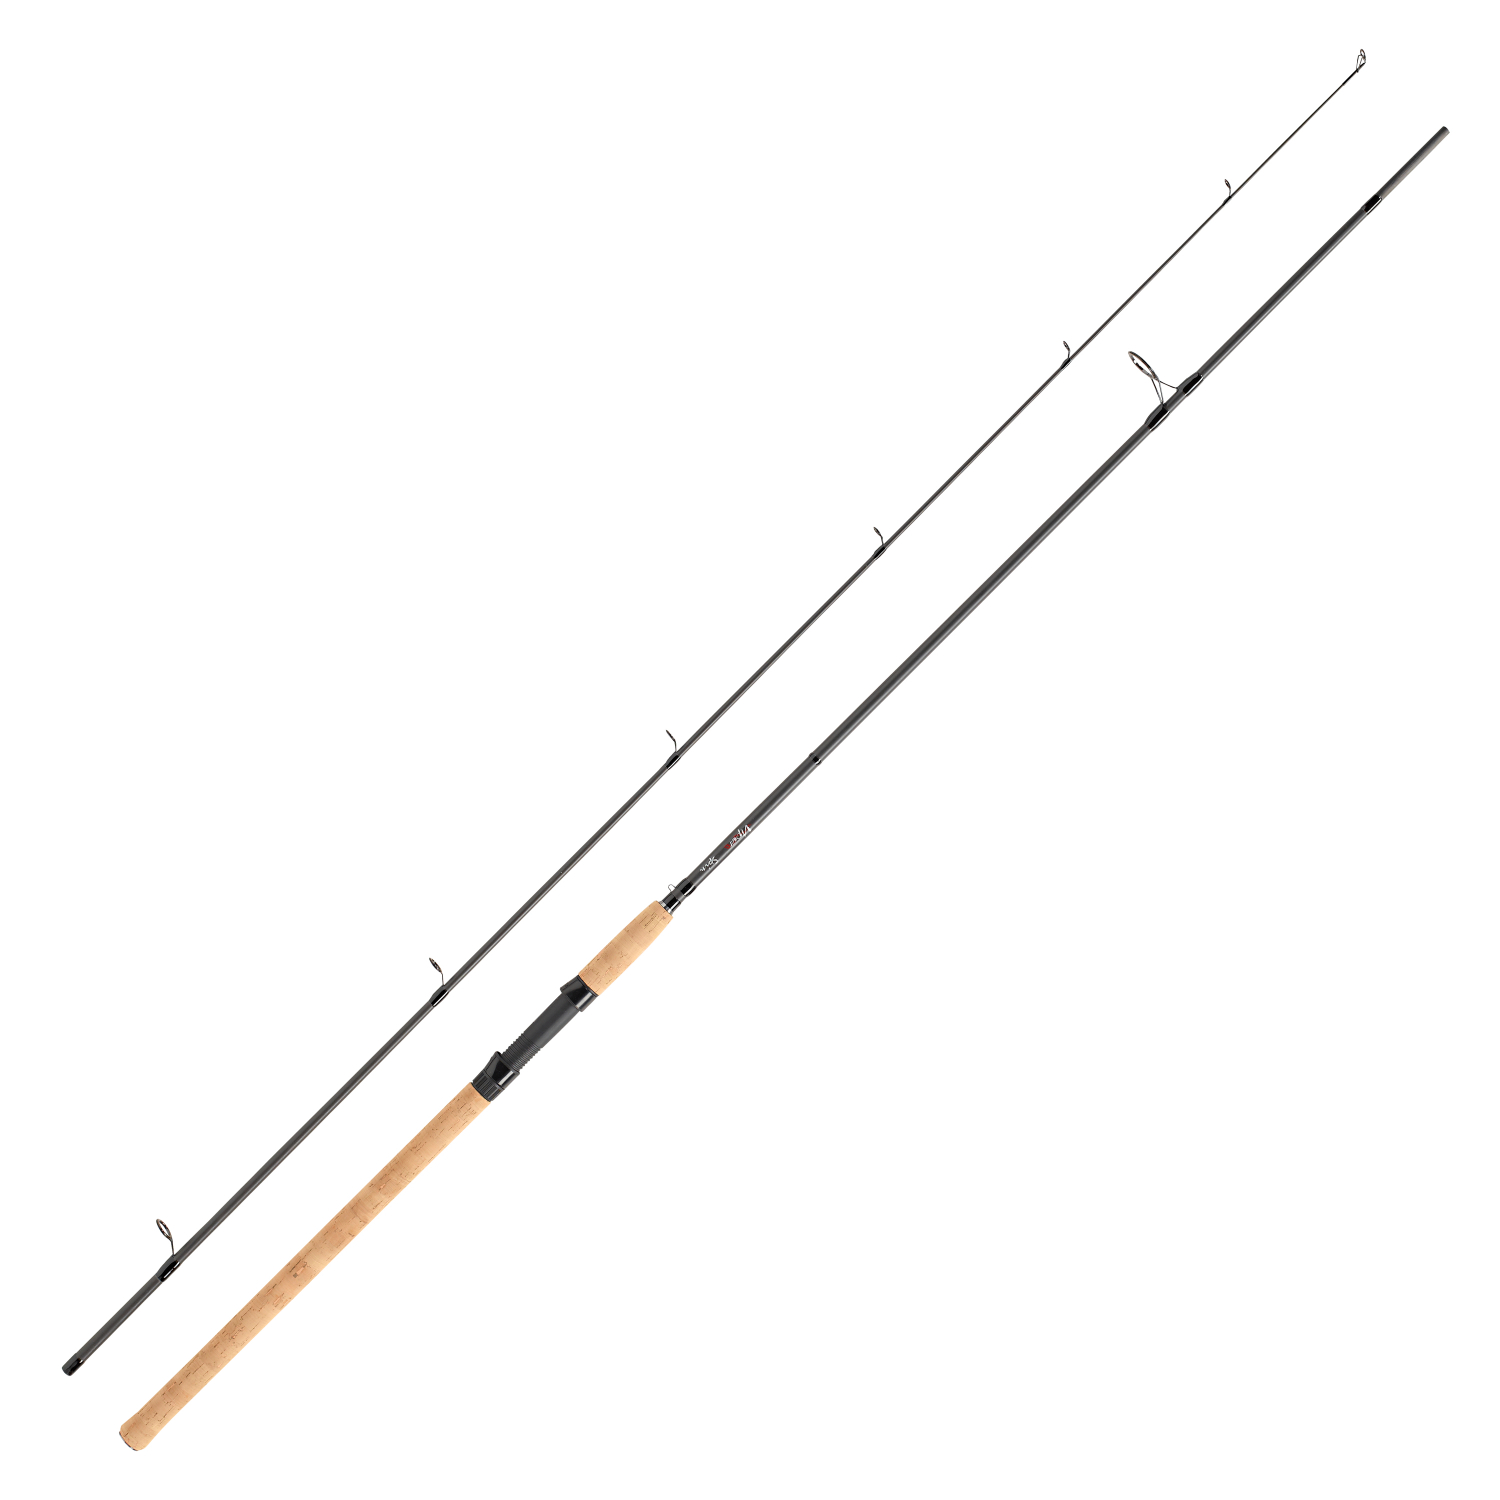 Kogha Fishing Rod Viper Spin at low prices